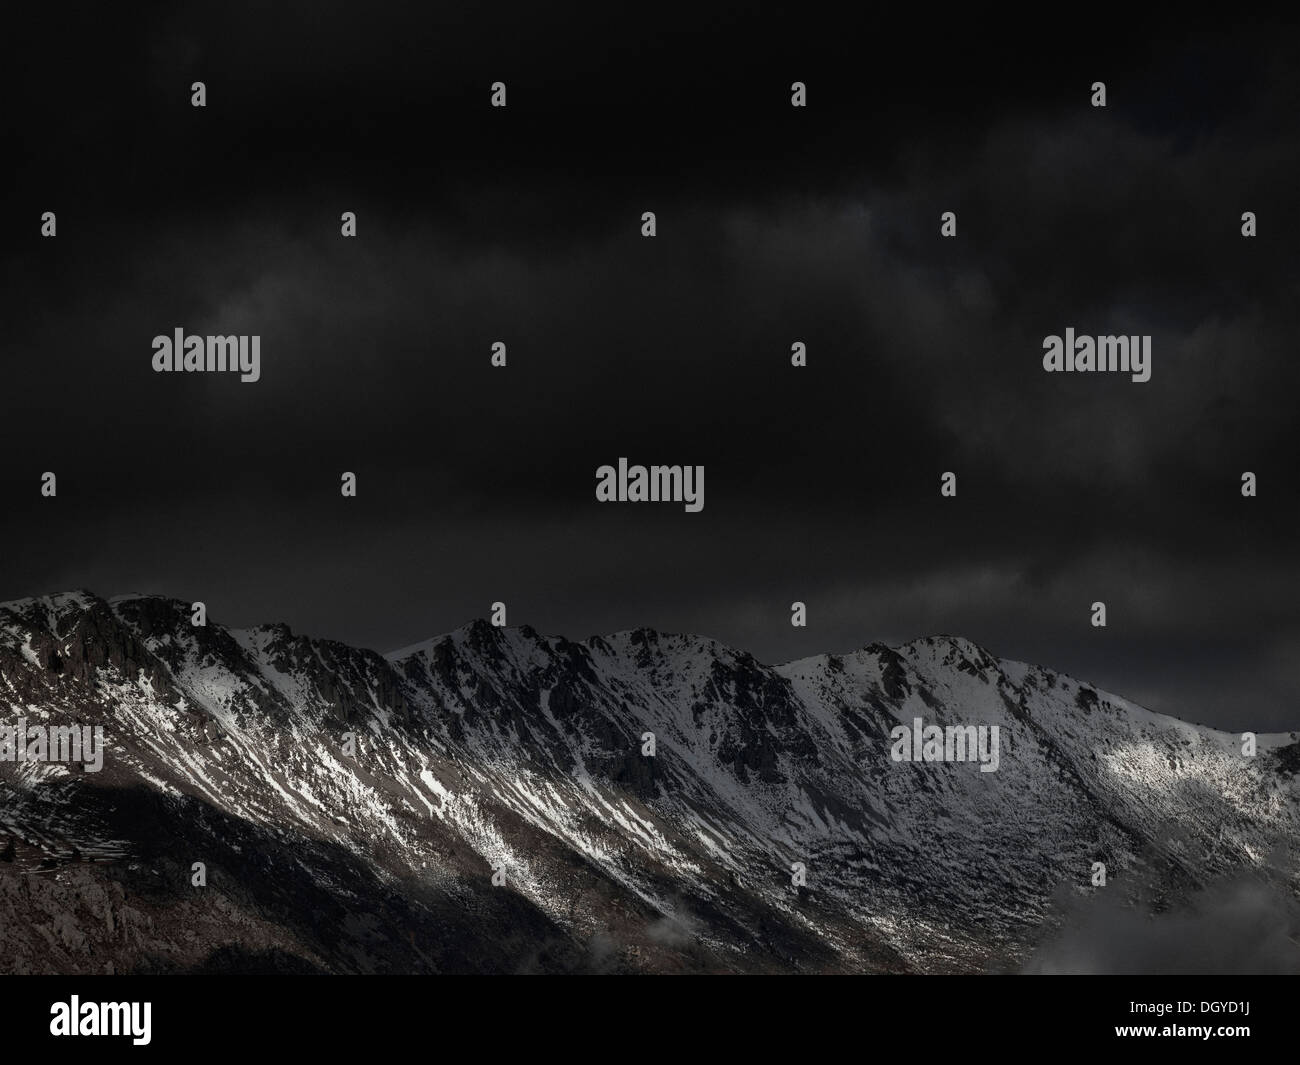 An ominous sky with some sunlight breaking through over a mountain range Stock Photo